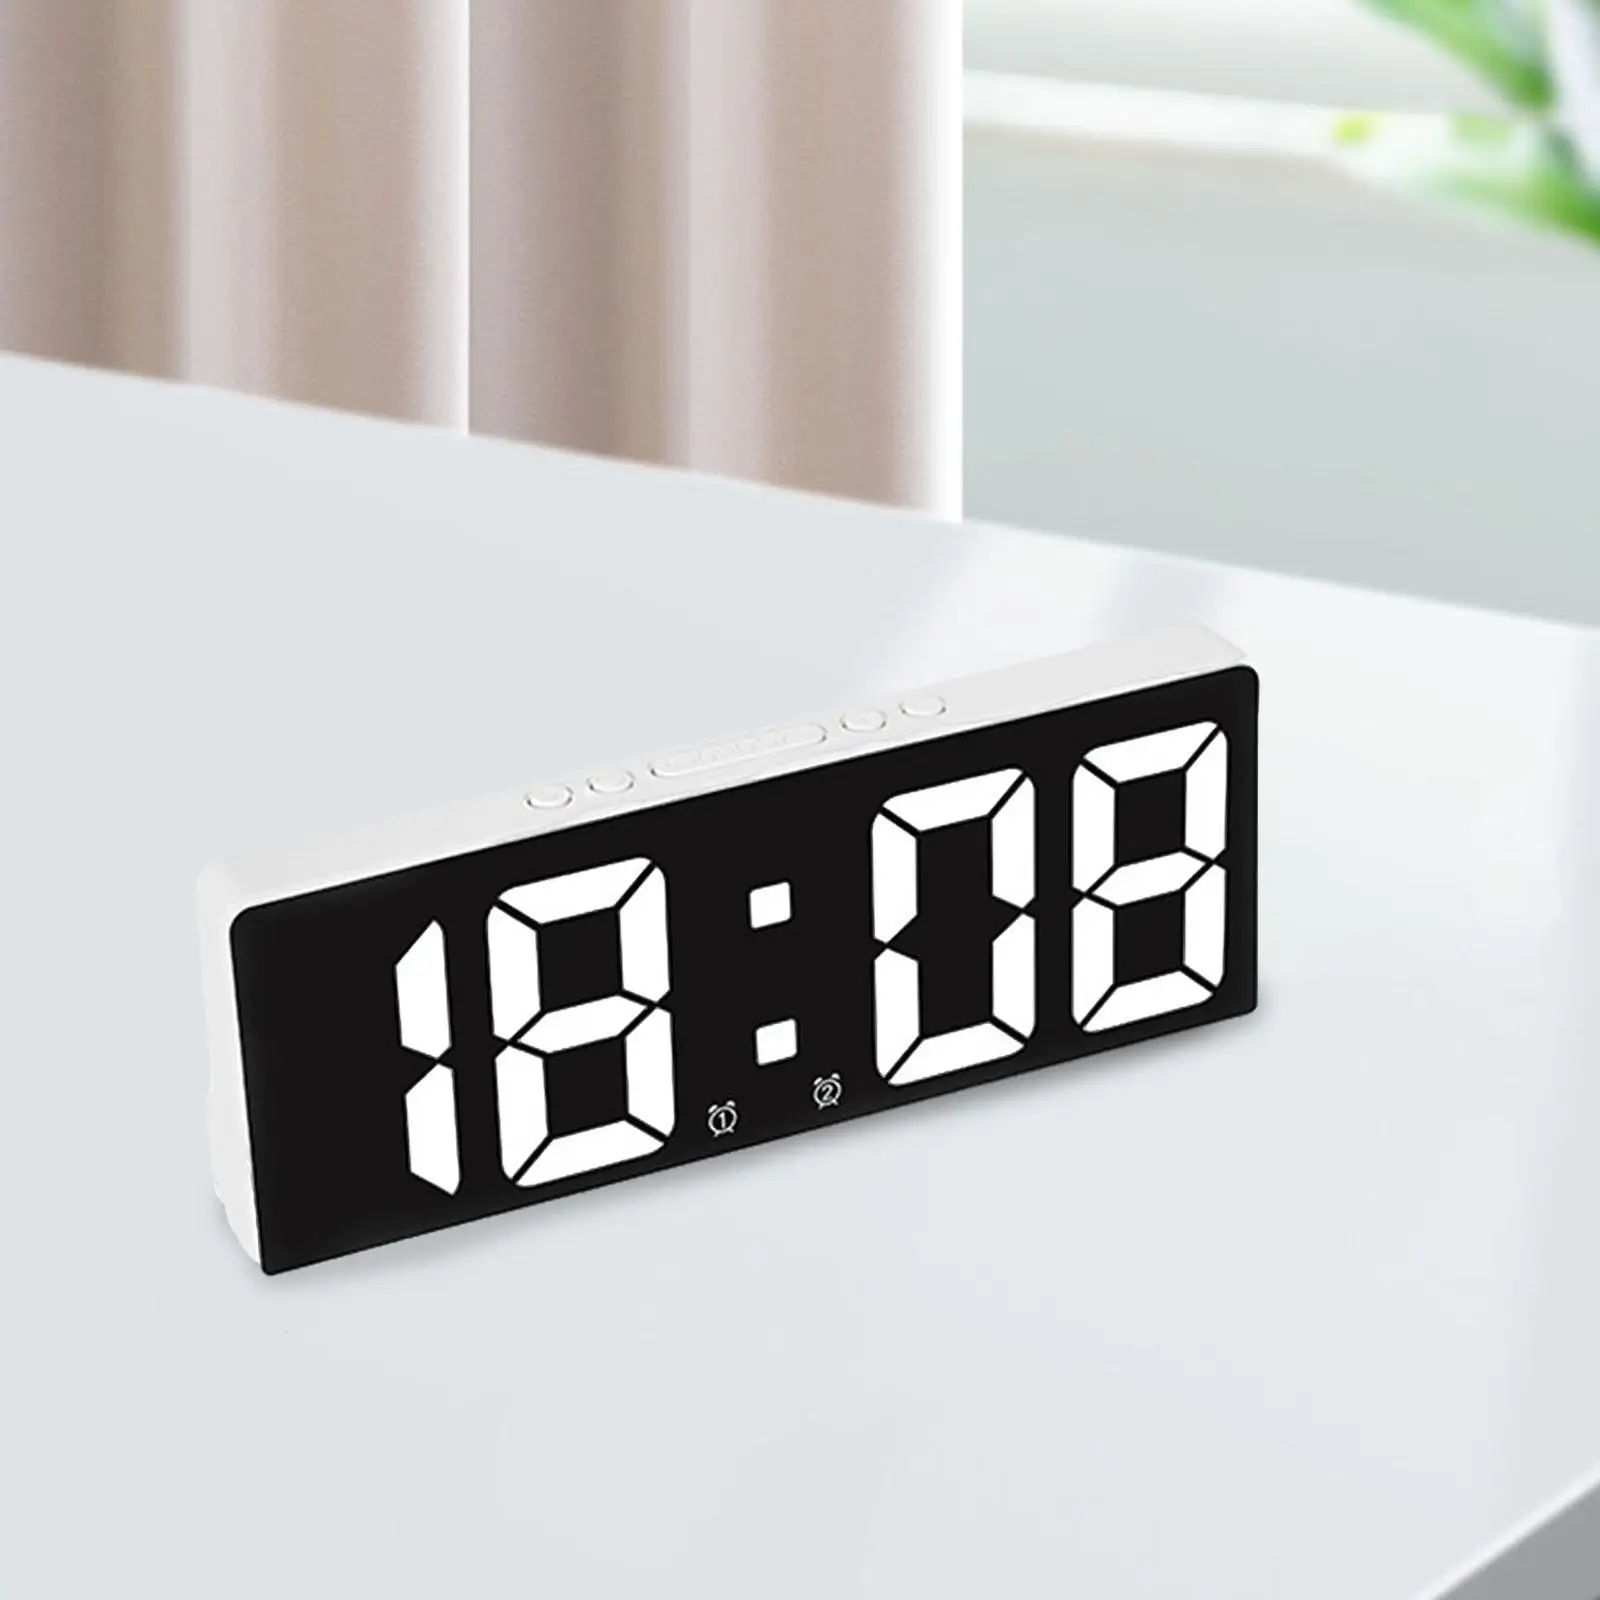 Large Number Alarm Clock Temperature Electronic USB Charger Table Large LED